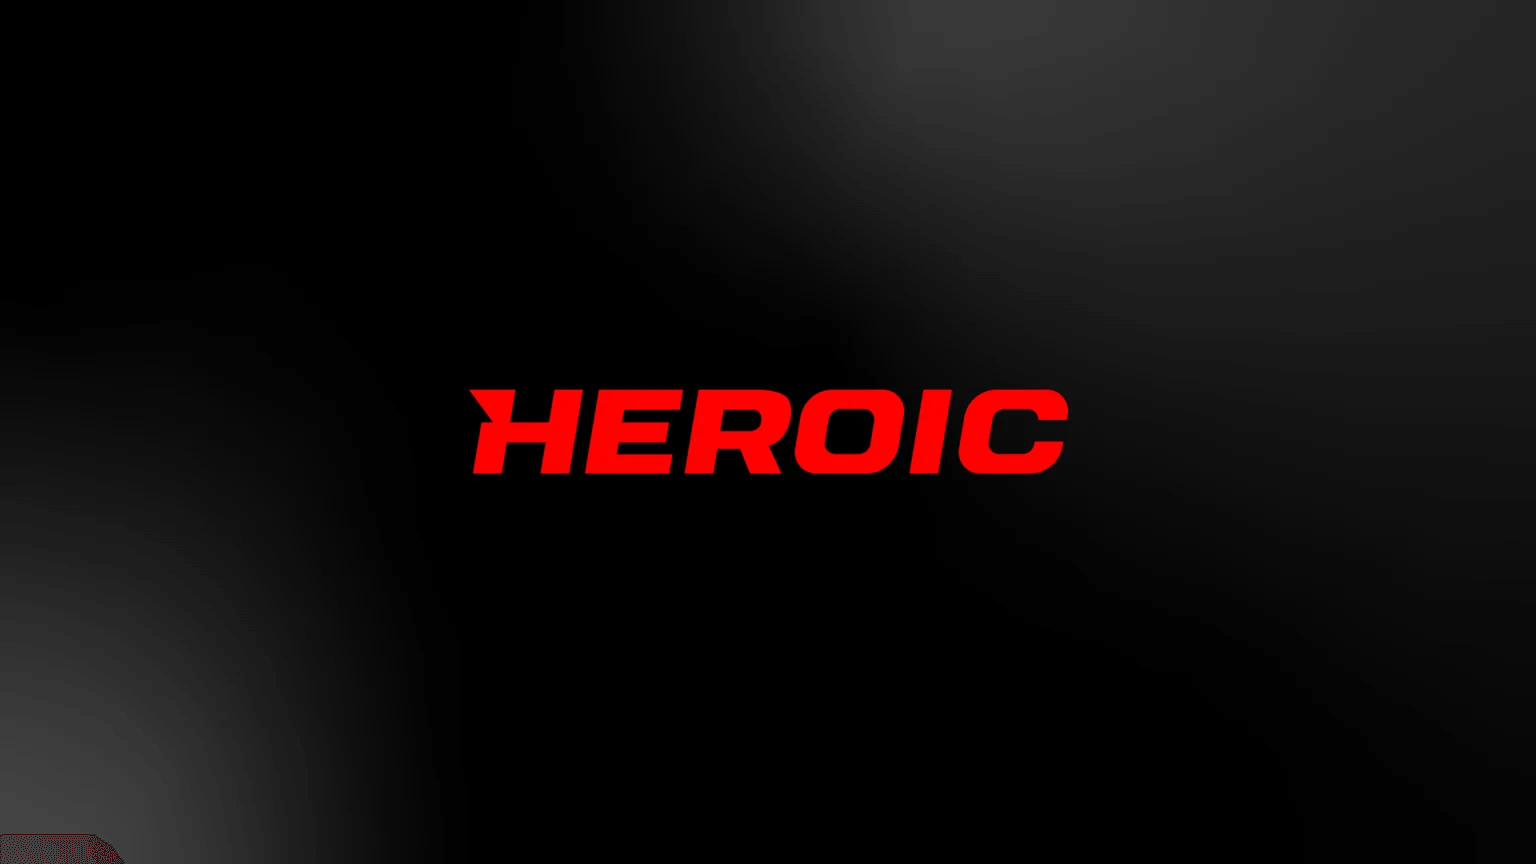 Heroic Enters Dota 2 Scene For The First Time